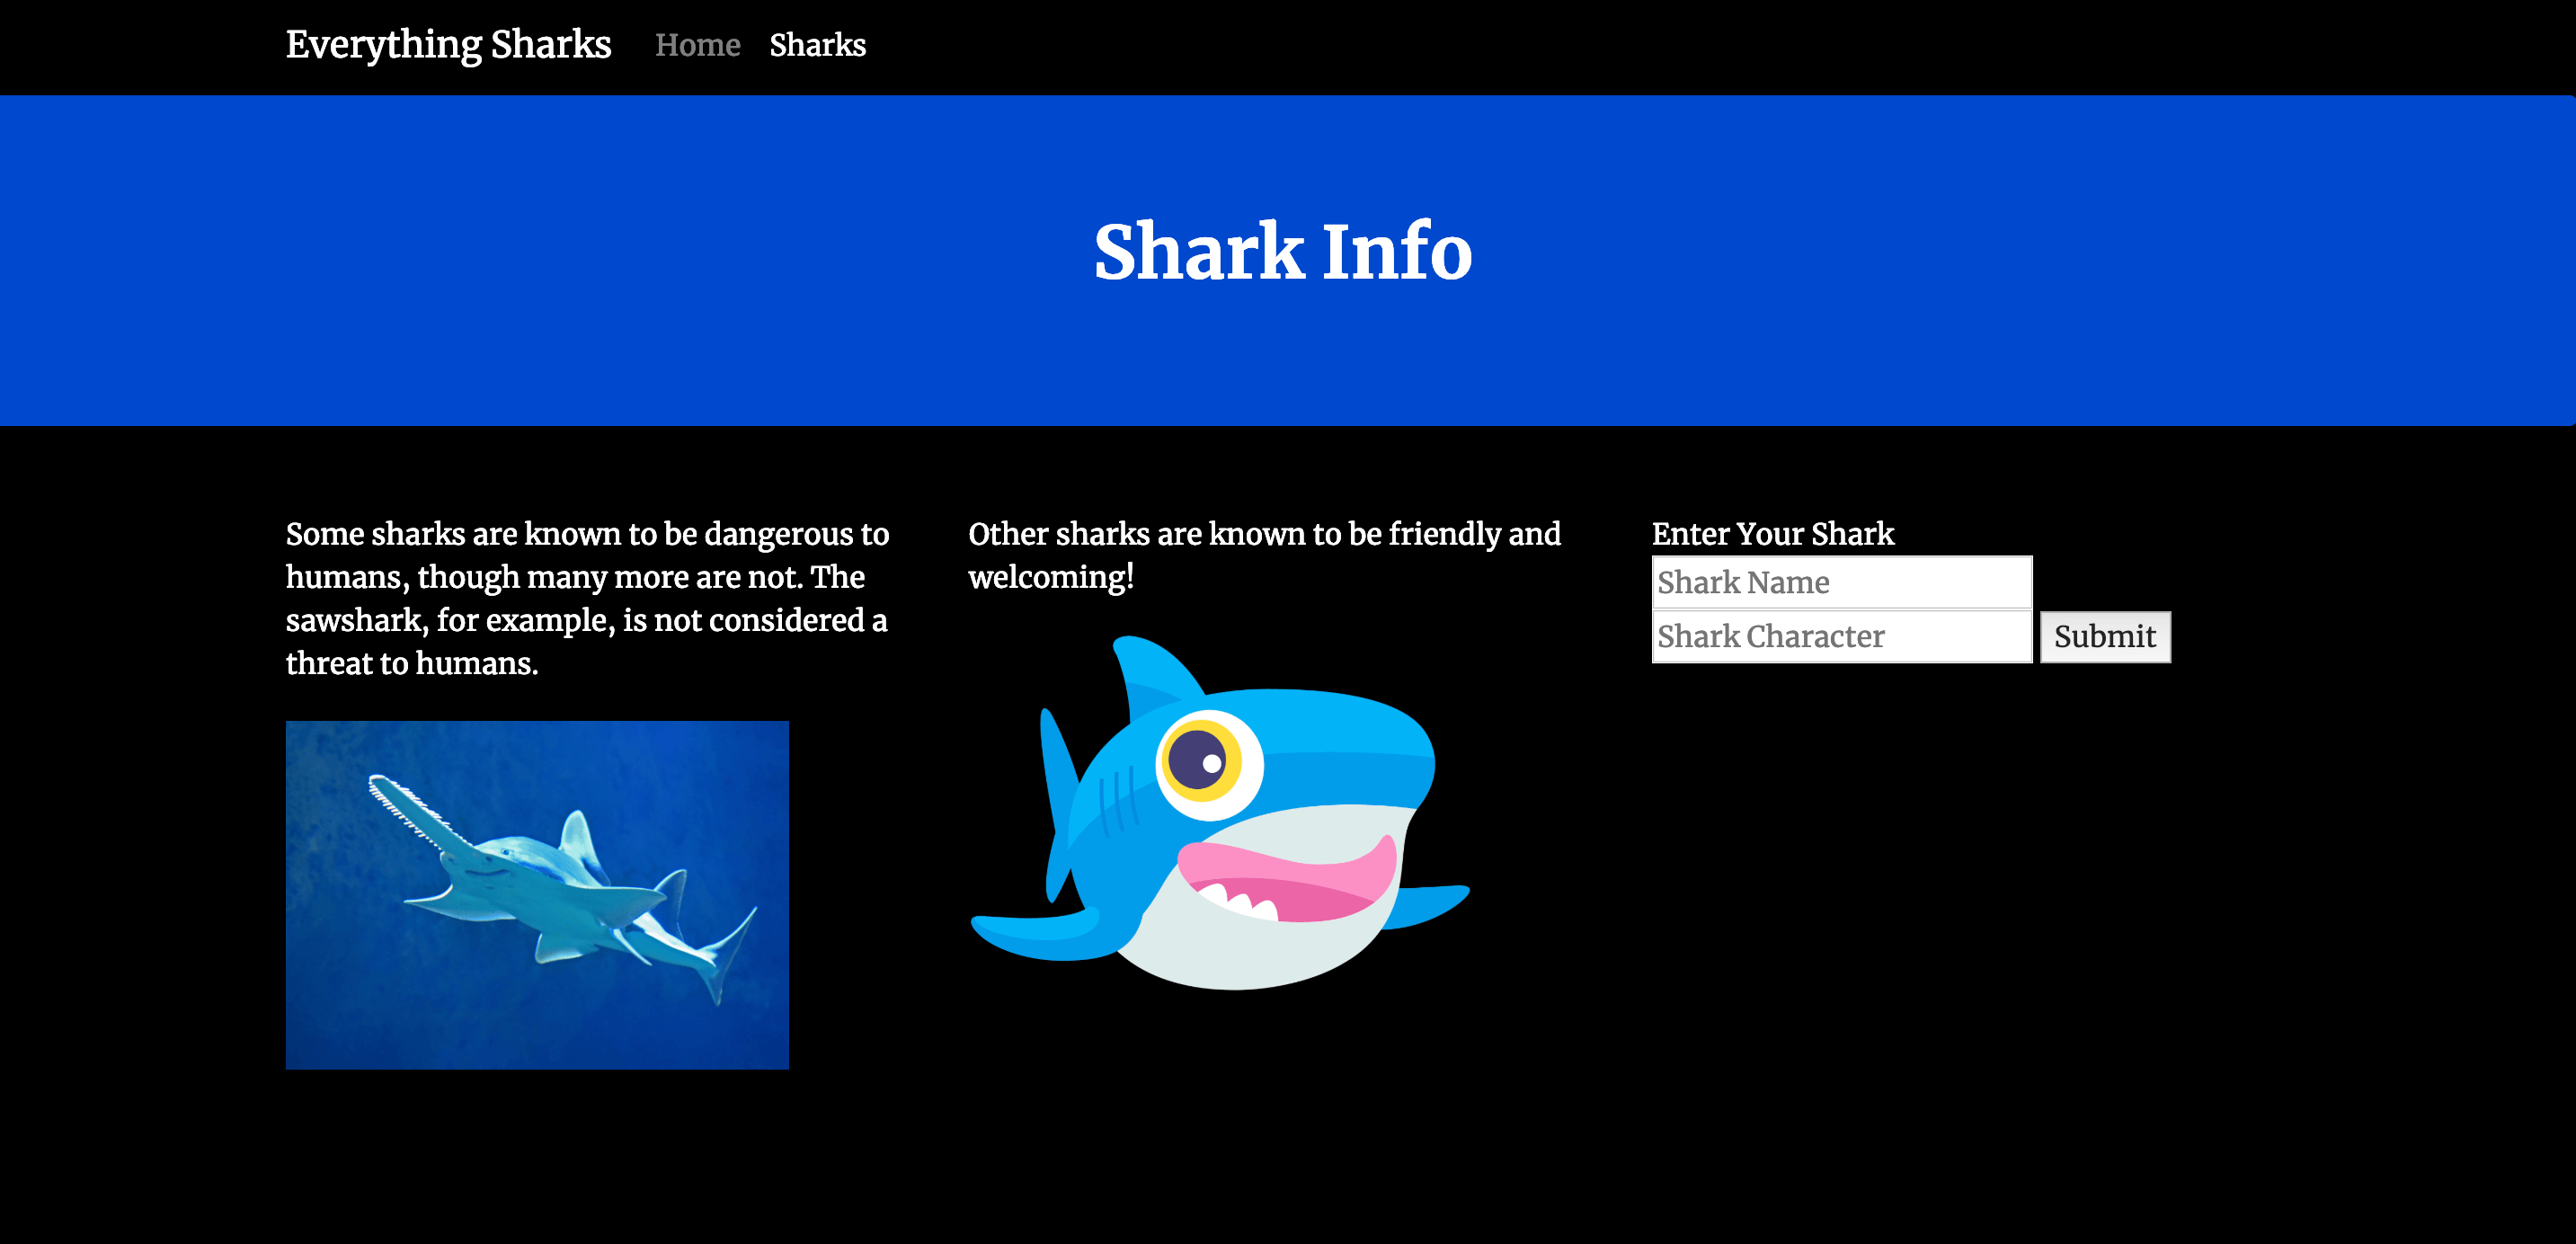 Shark Info Form where you can enter a shark name and the characteristics of that shark